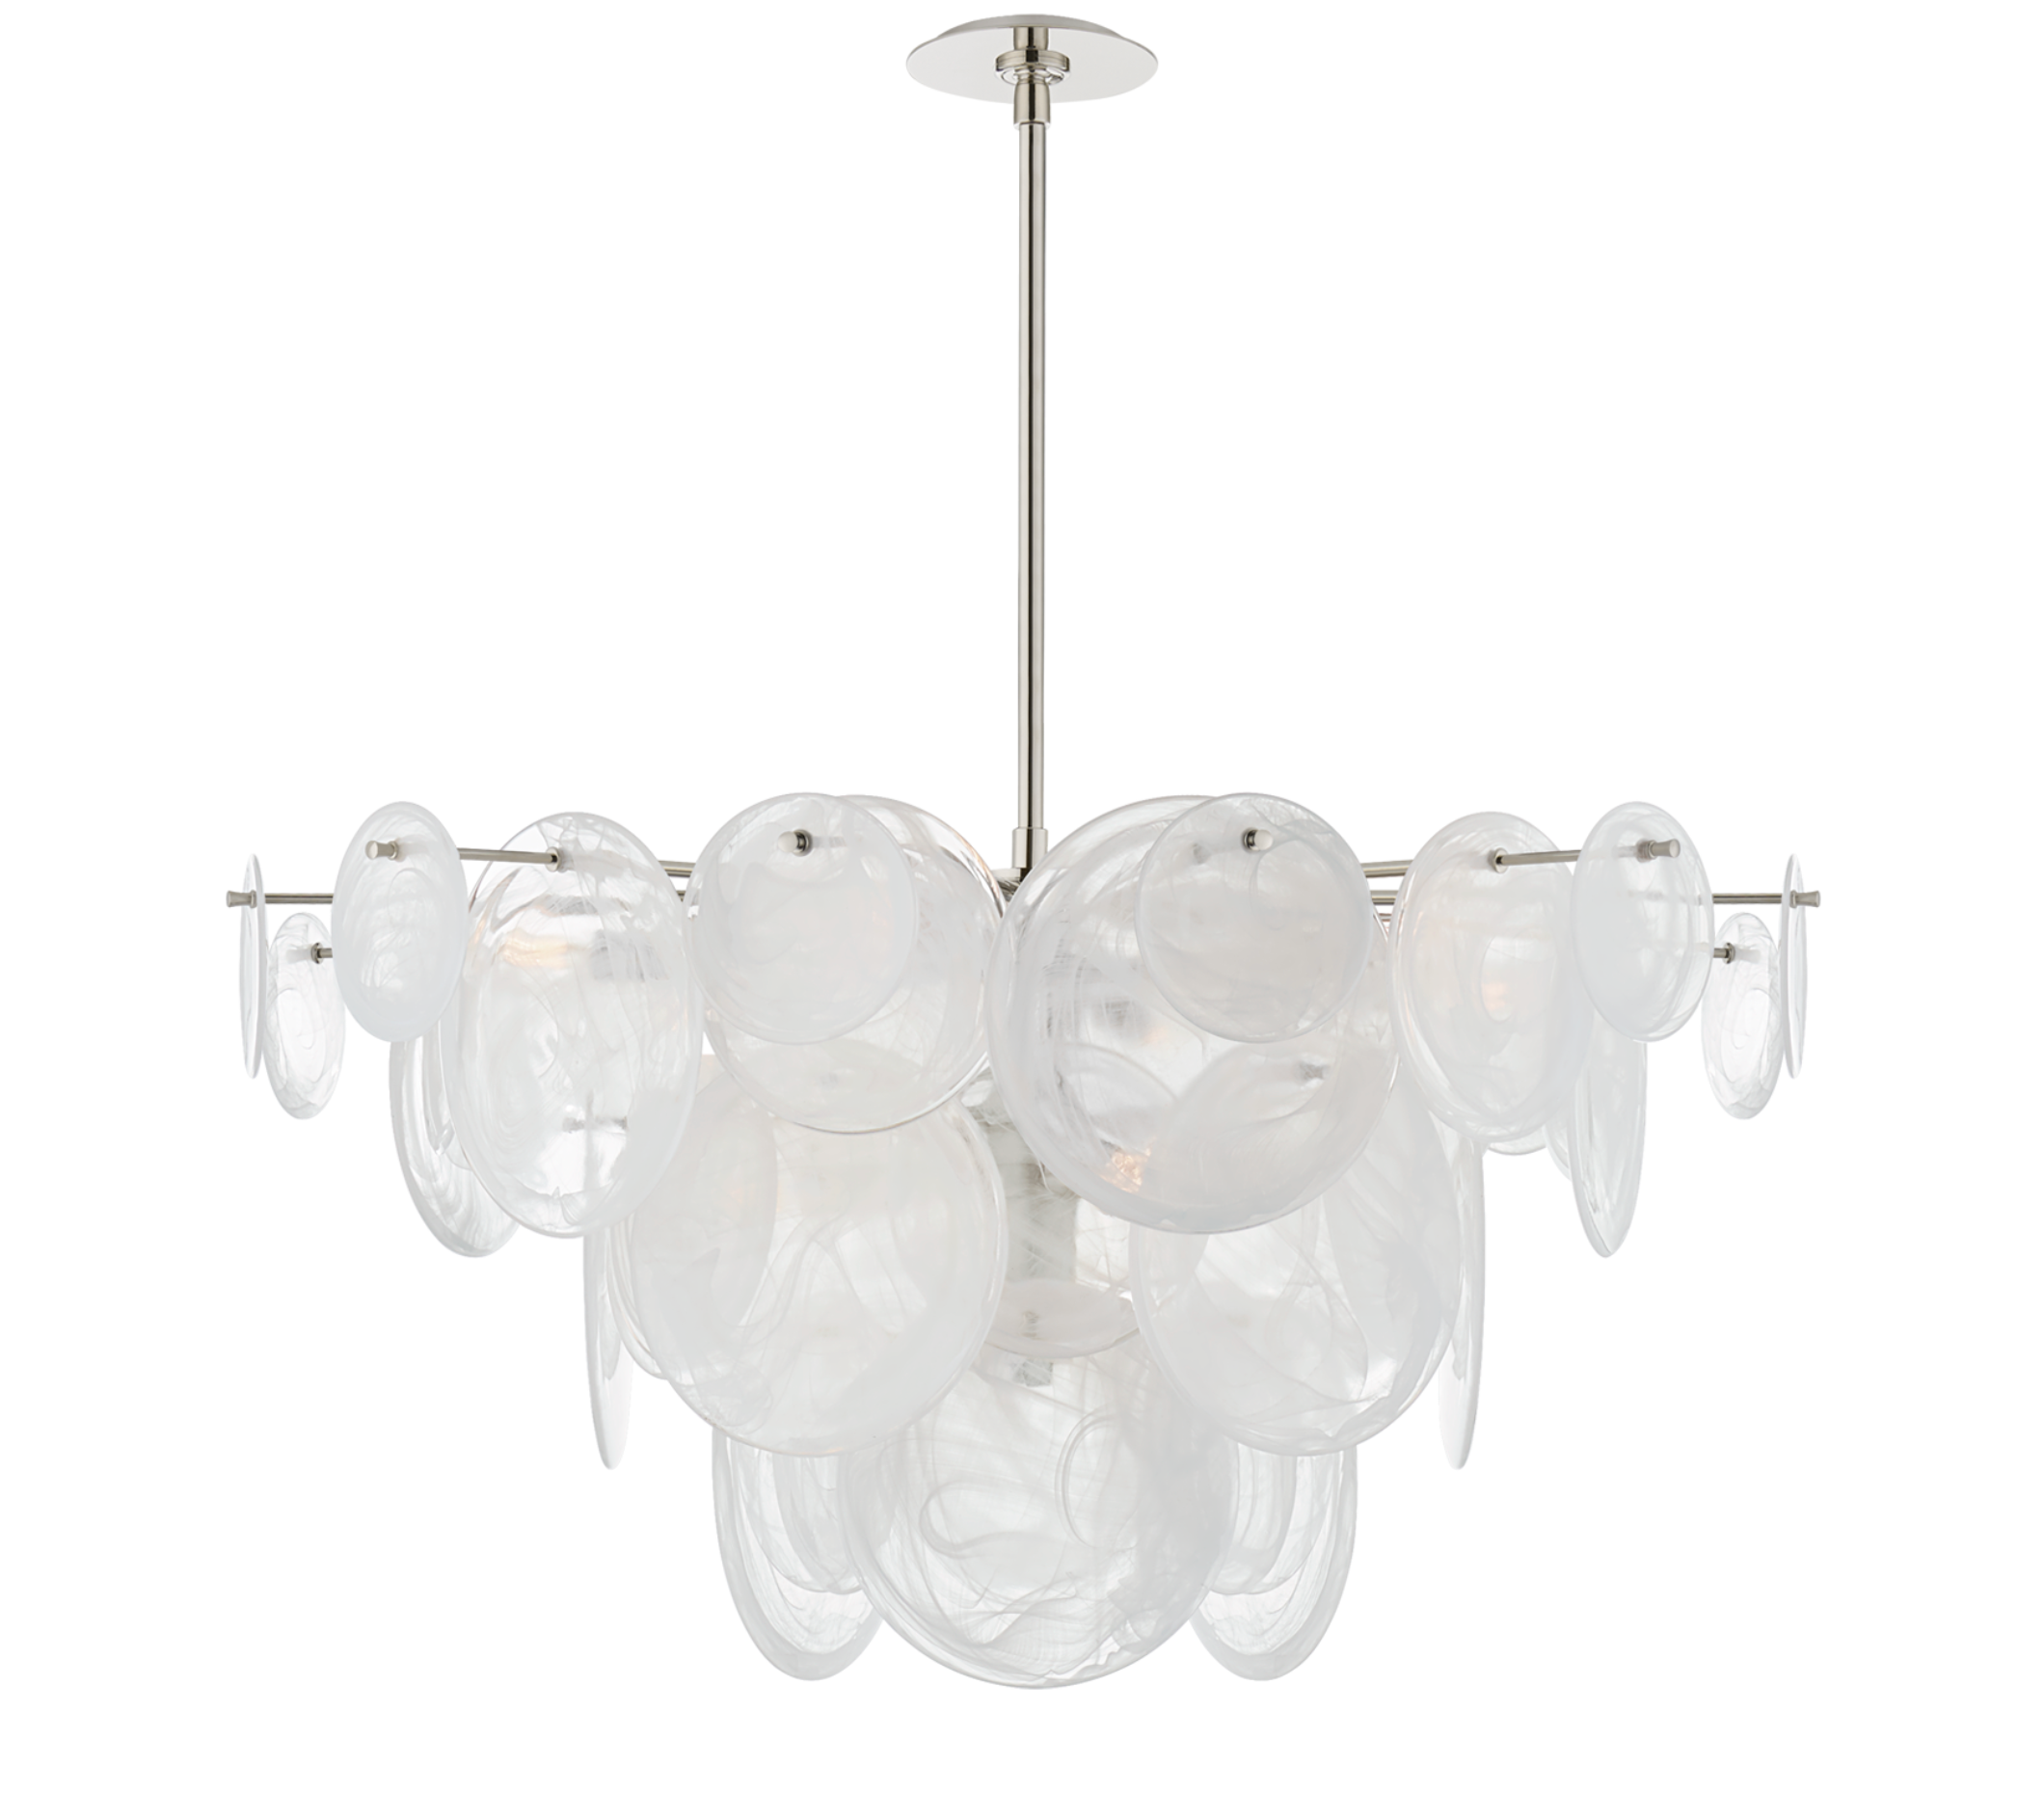 Cheverny Large Chandelier By Visual Comfort Studio